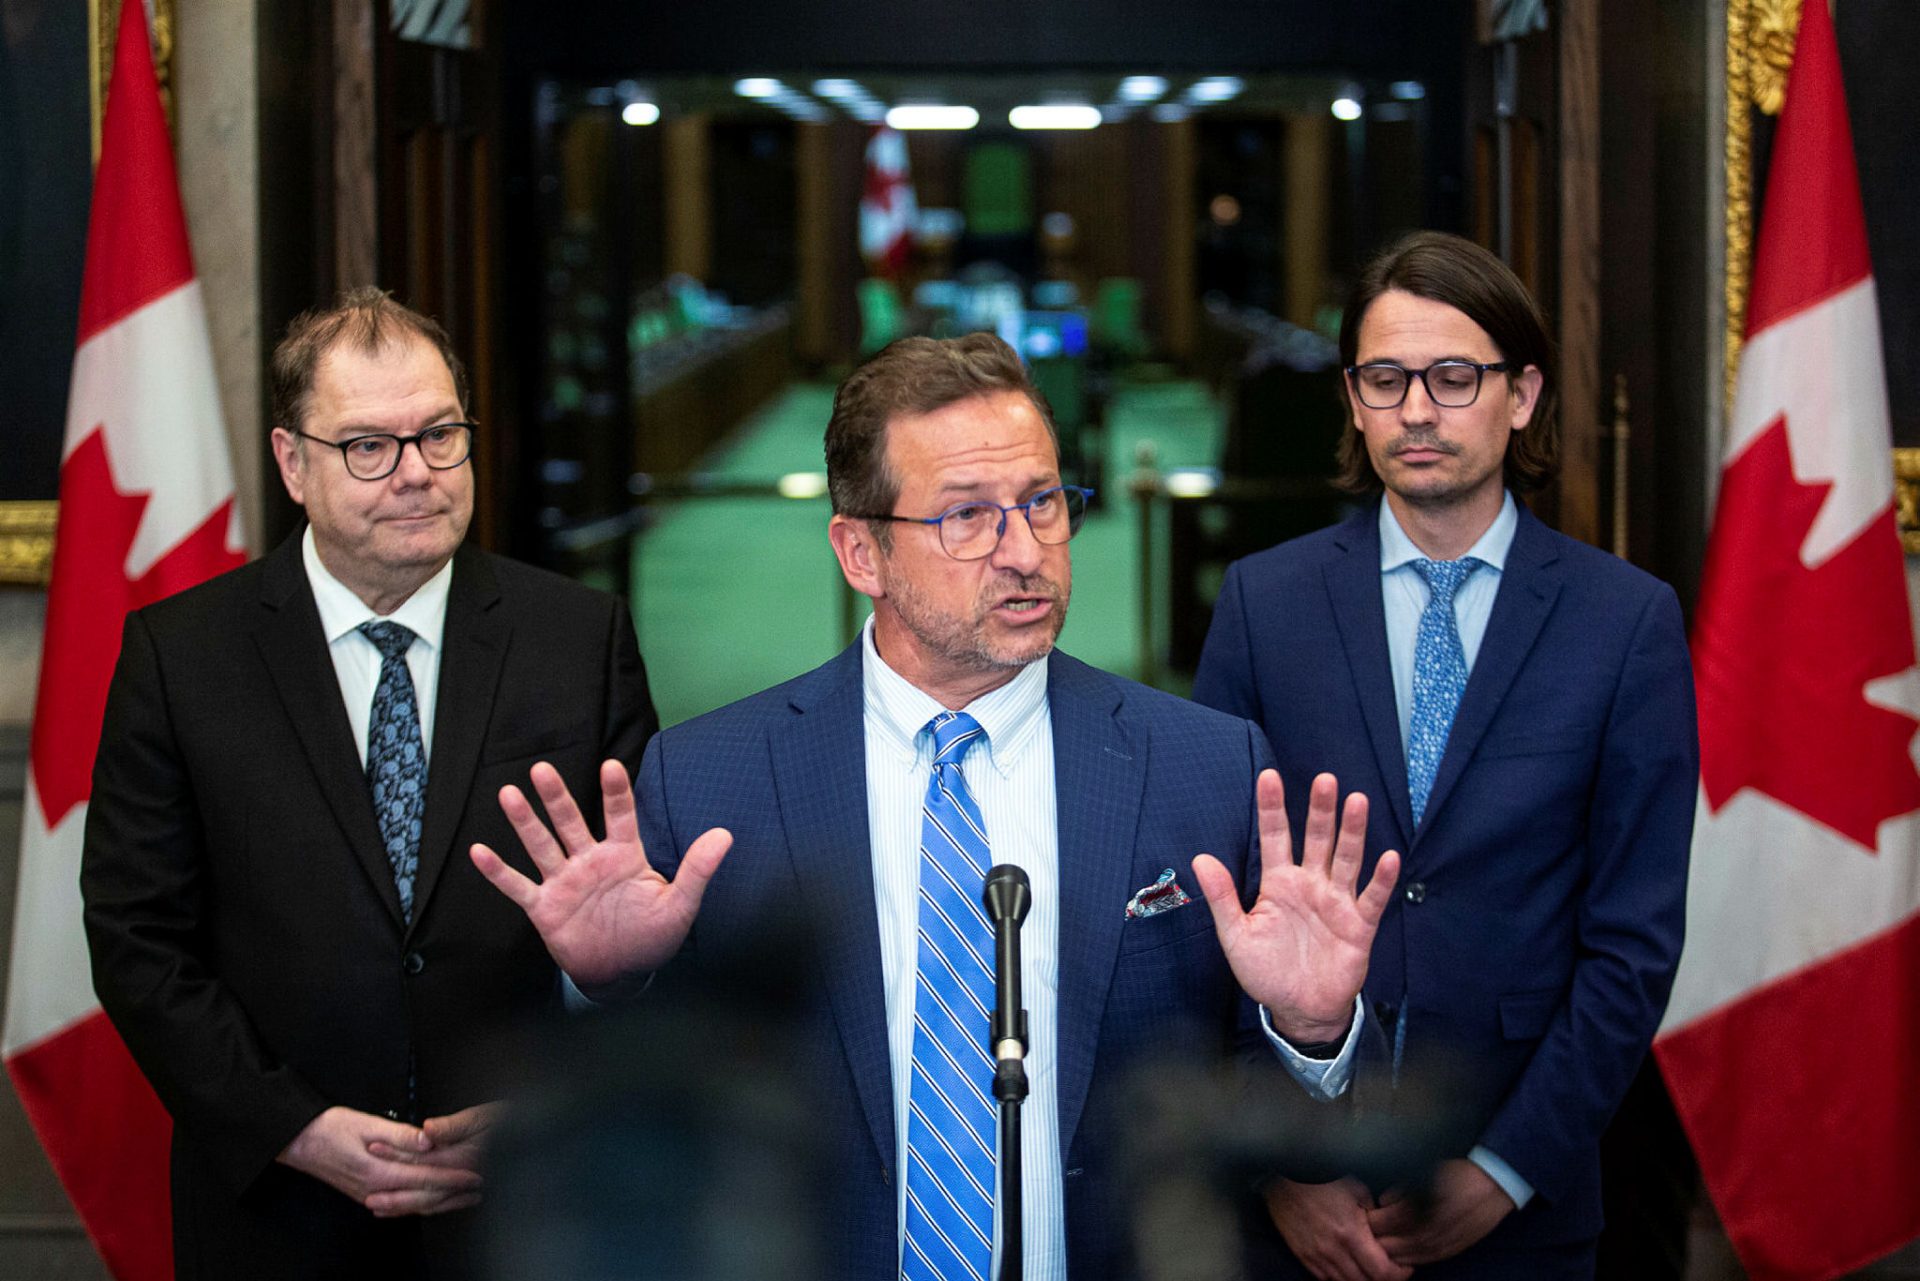 Bloc Québécois leader Yves-Francois Blanchet speaks with reporters before Question Period on  May 17, 2023, flanked by his party's language critic and MP for La Pointe-de-l'Île Mario Beaulieu and the MP for Mirabel Jean-Denis Garon.